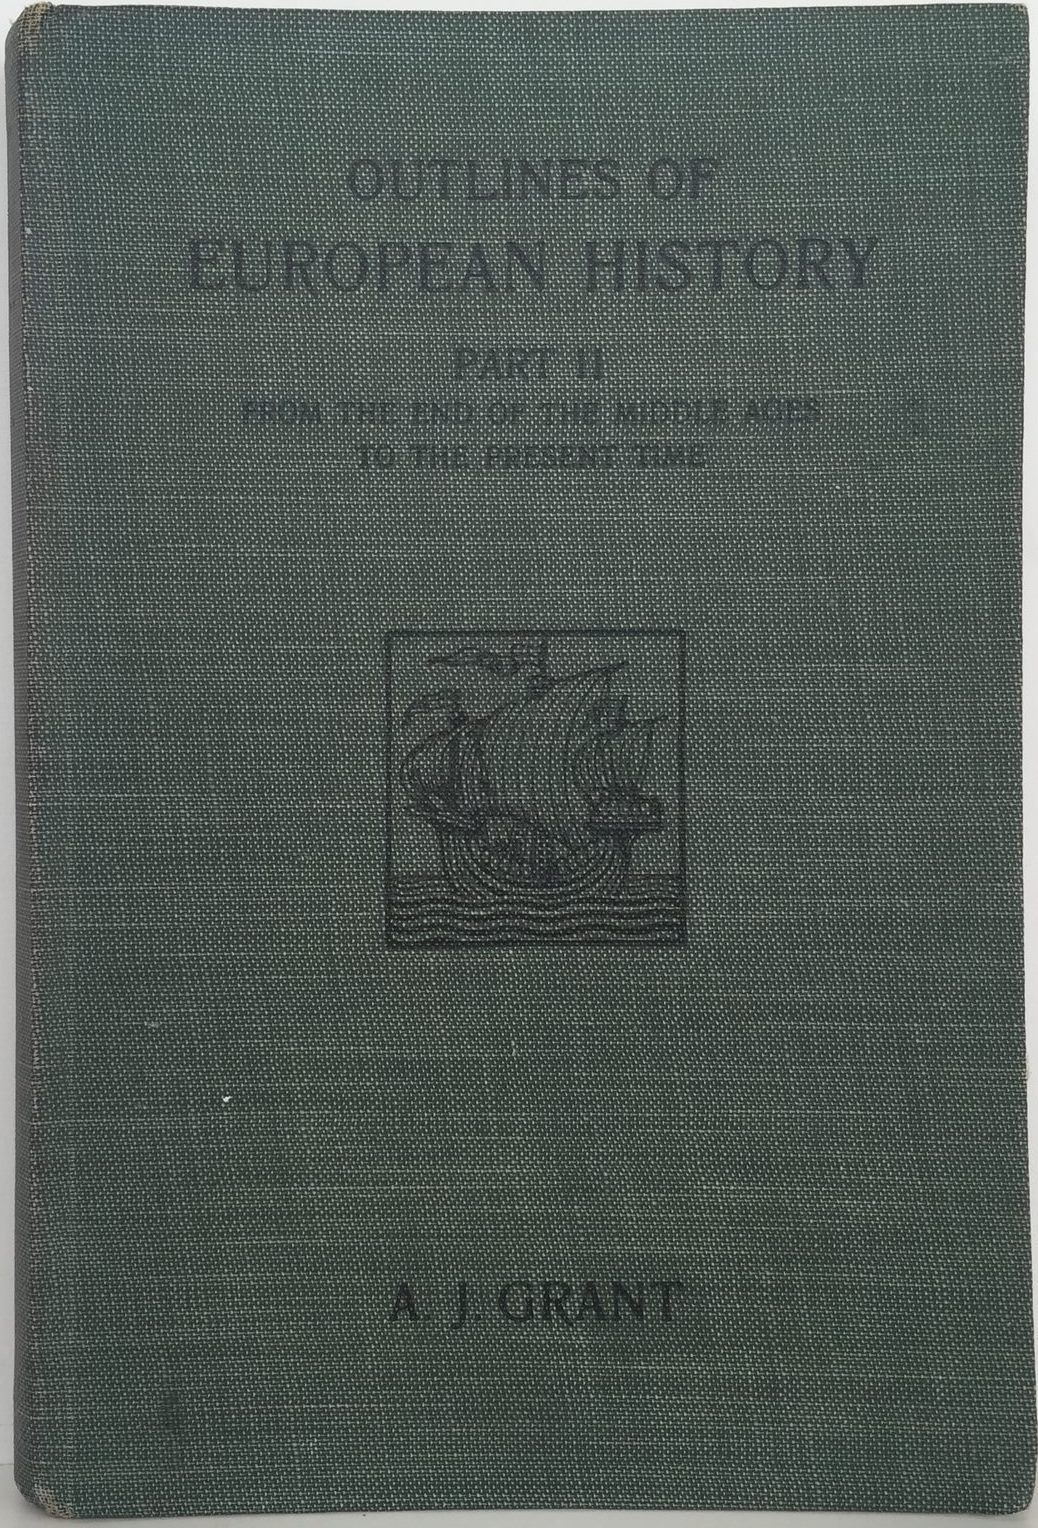 OUTLINES OF EUROPEAN HISTORY Part II